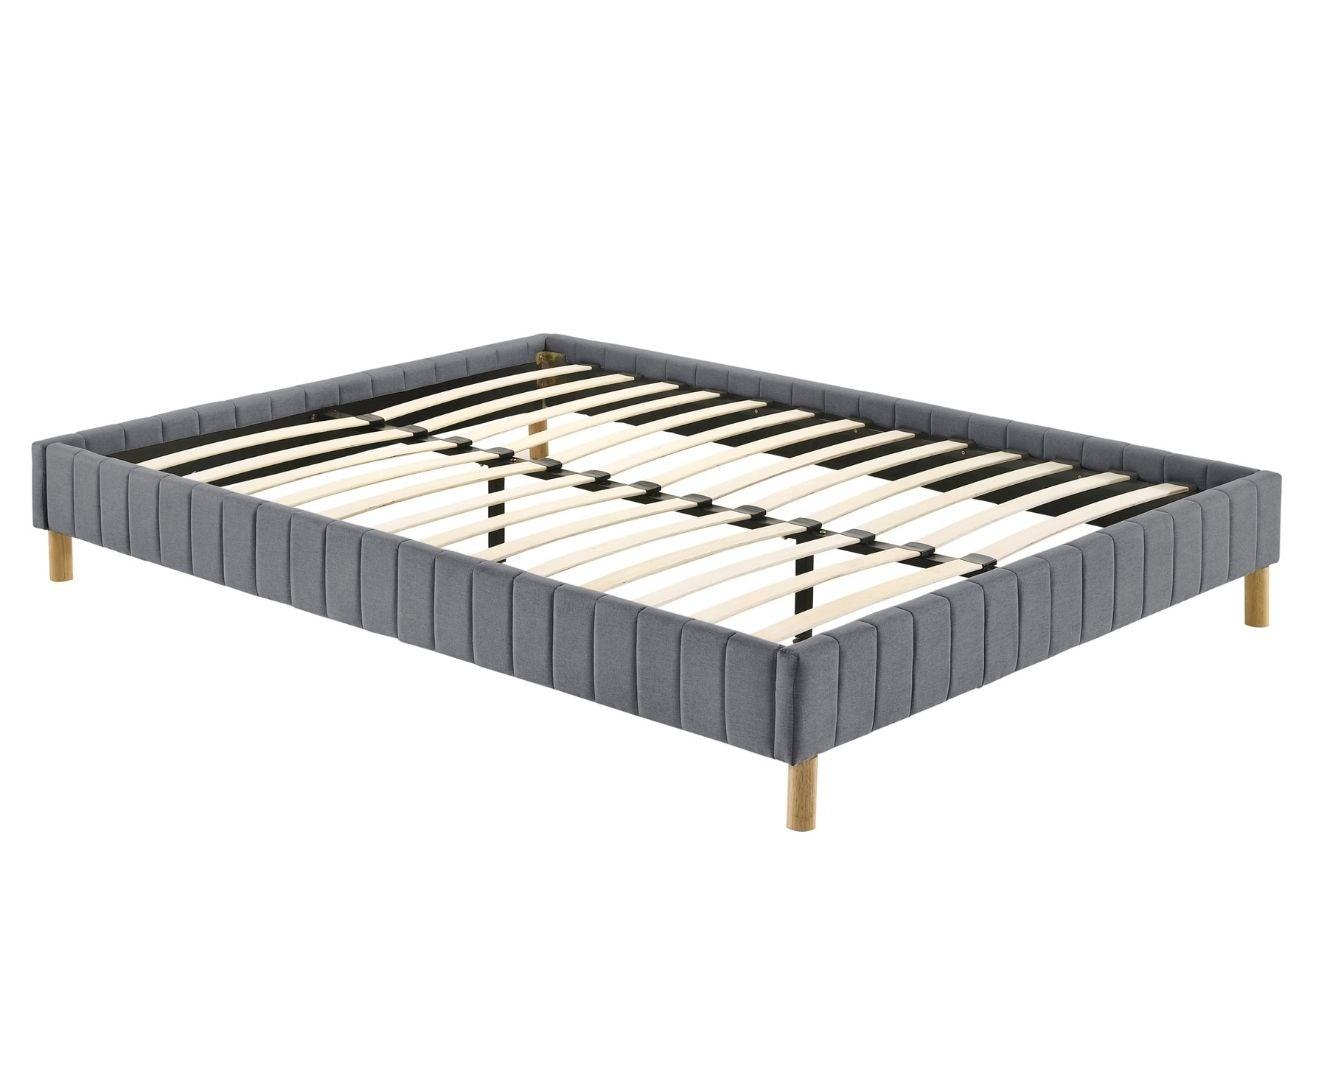 Aries Contemporary Platform Bed Base Fabric Frame with Timber Slat Double Light Grey